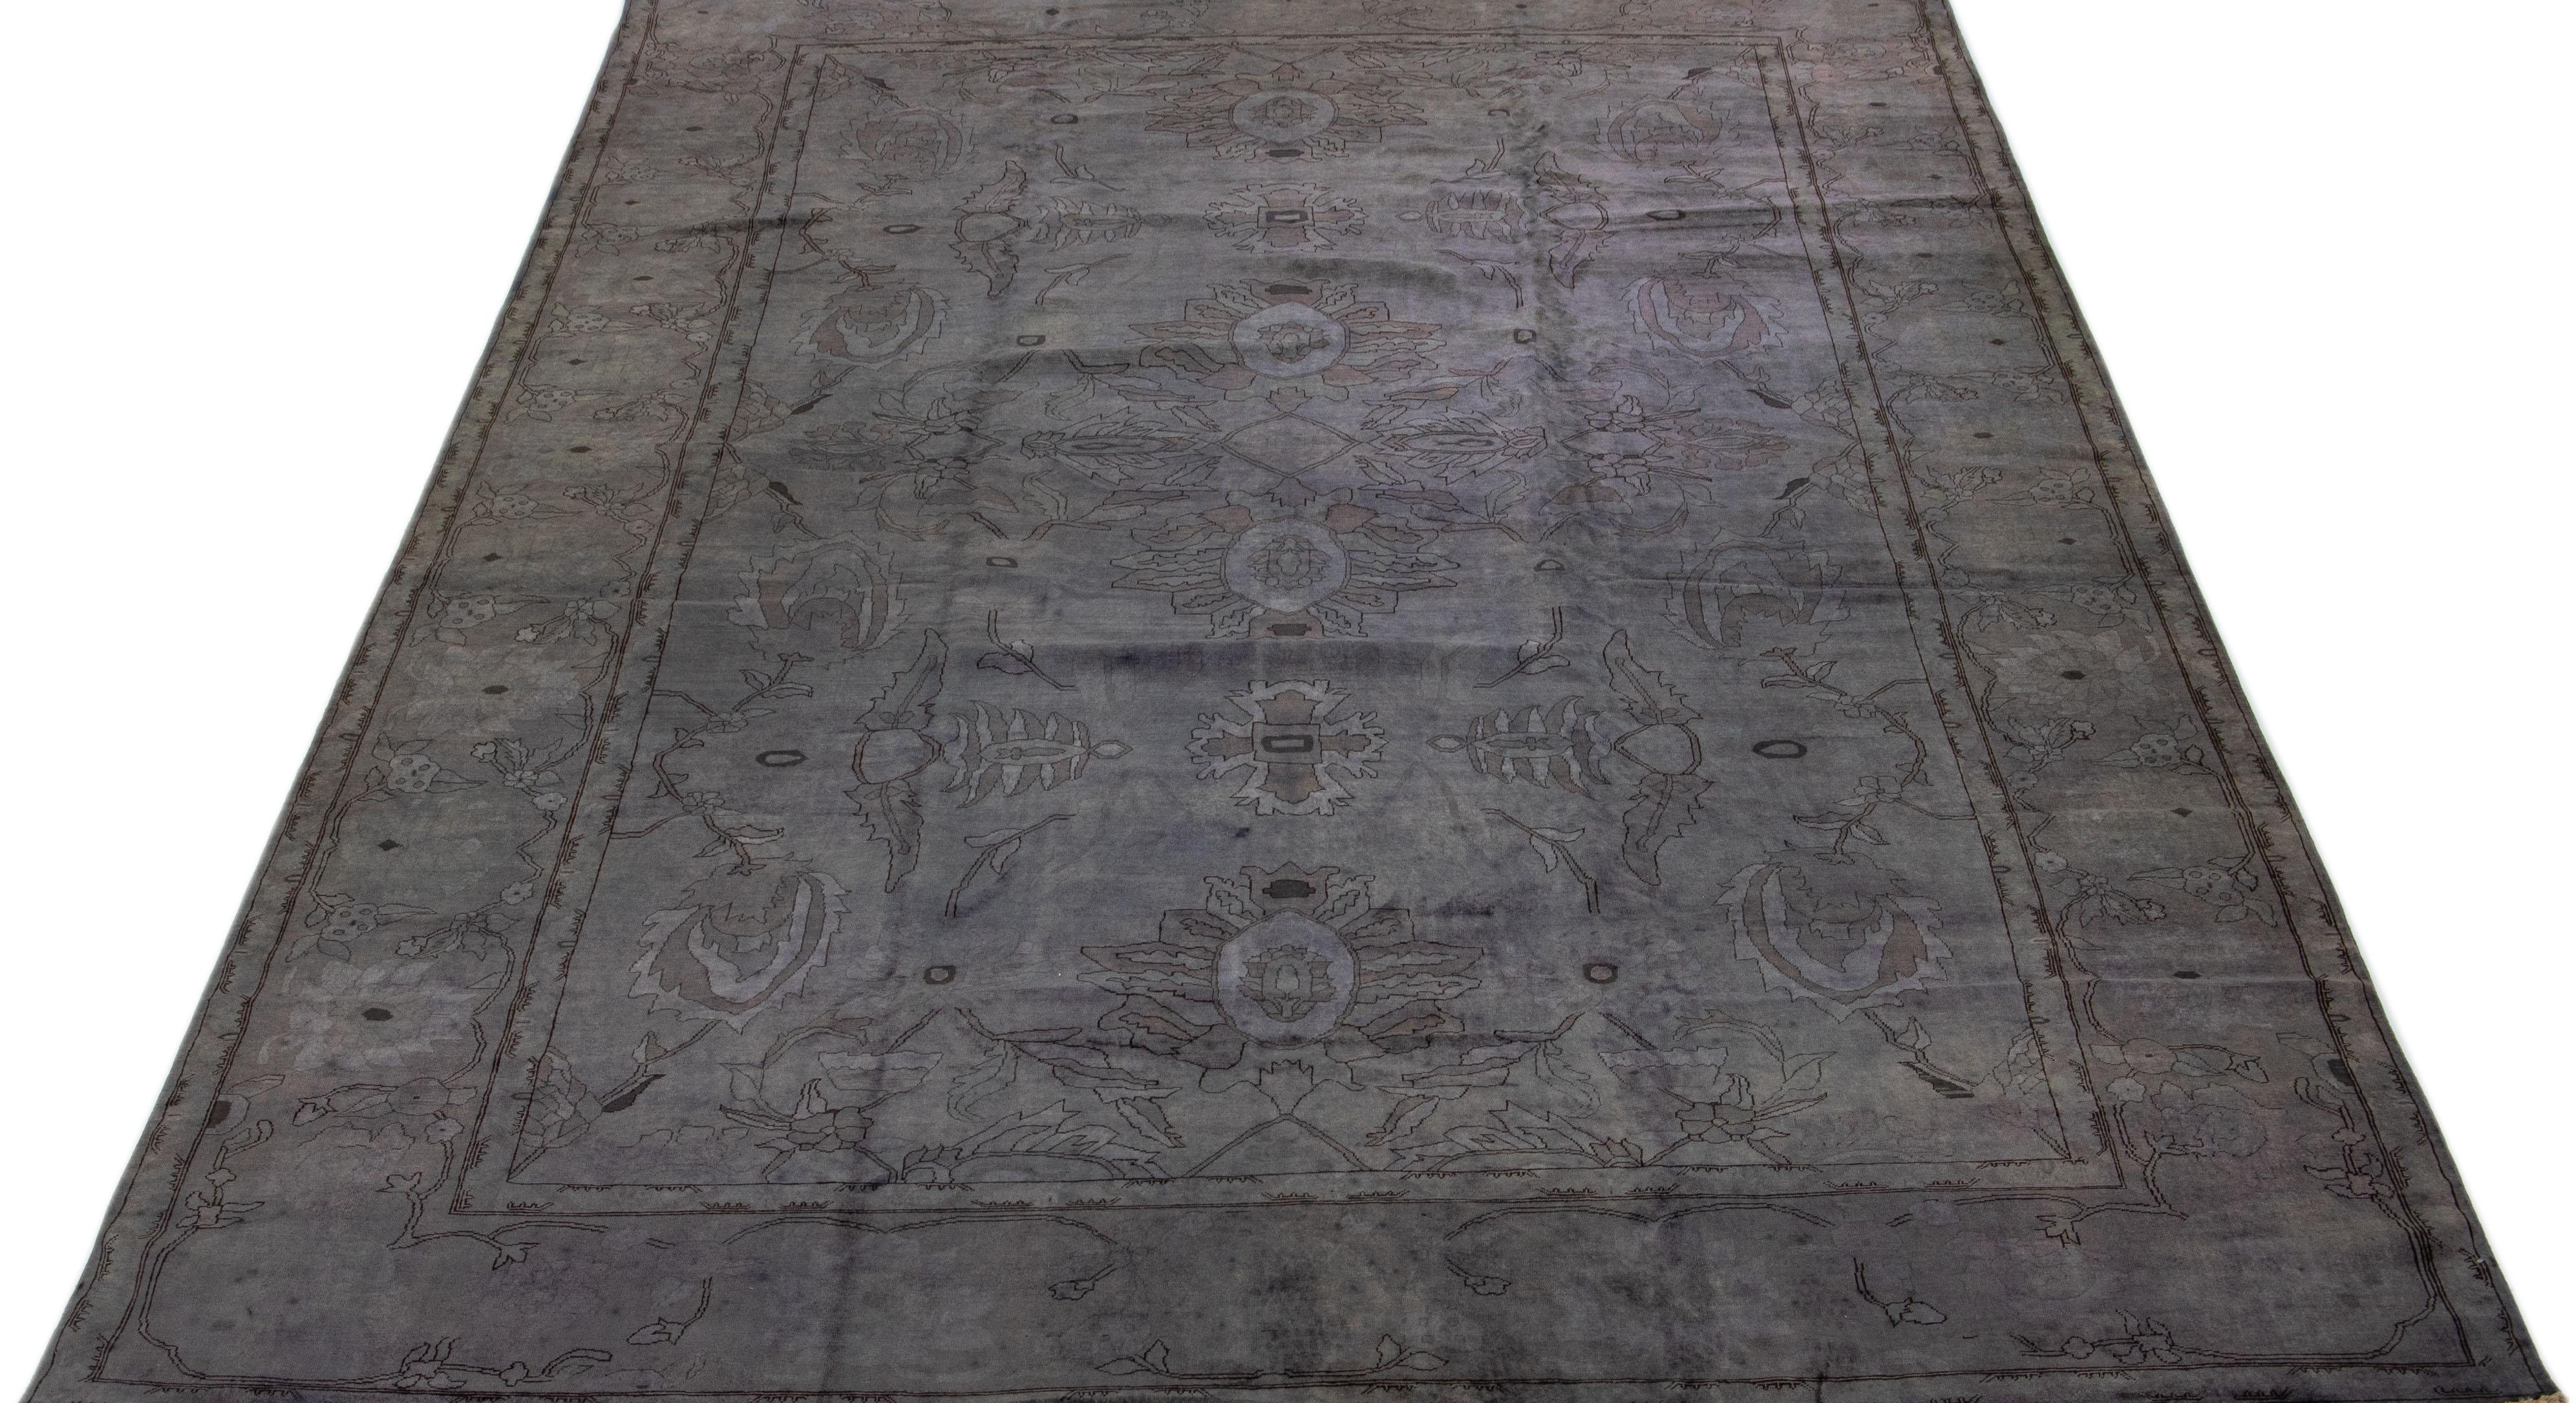 Beautiful modern overdyed hand-knotted oversize wool rug with a gray field. This over-dyed rug has earthy tones in an all-over floral design.

This rug measures: 12'2' x 18'3